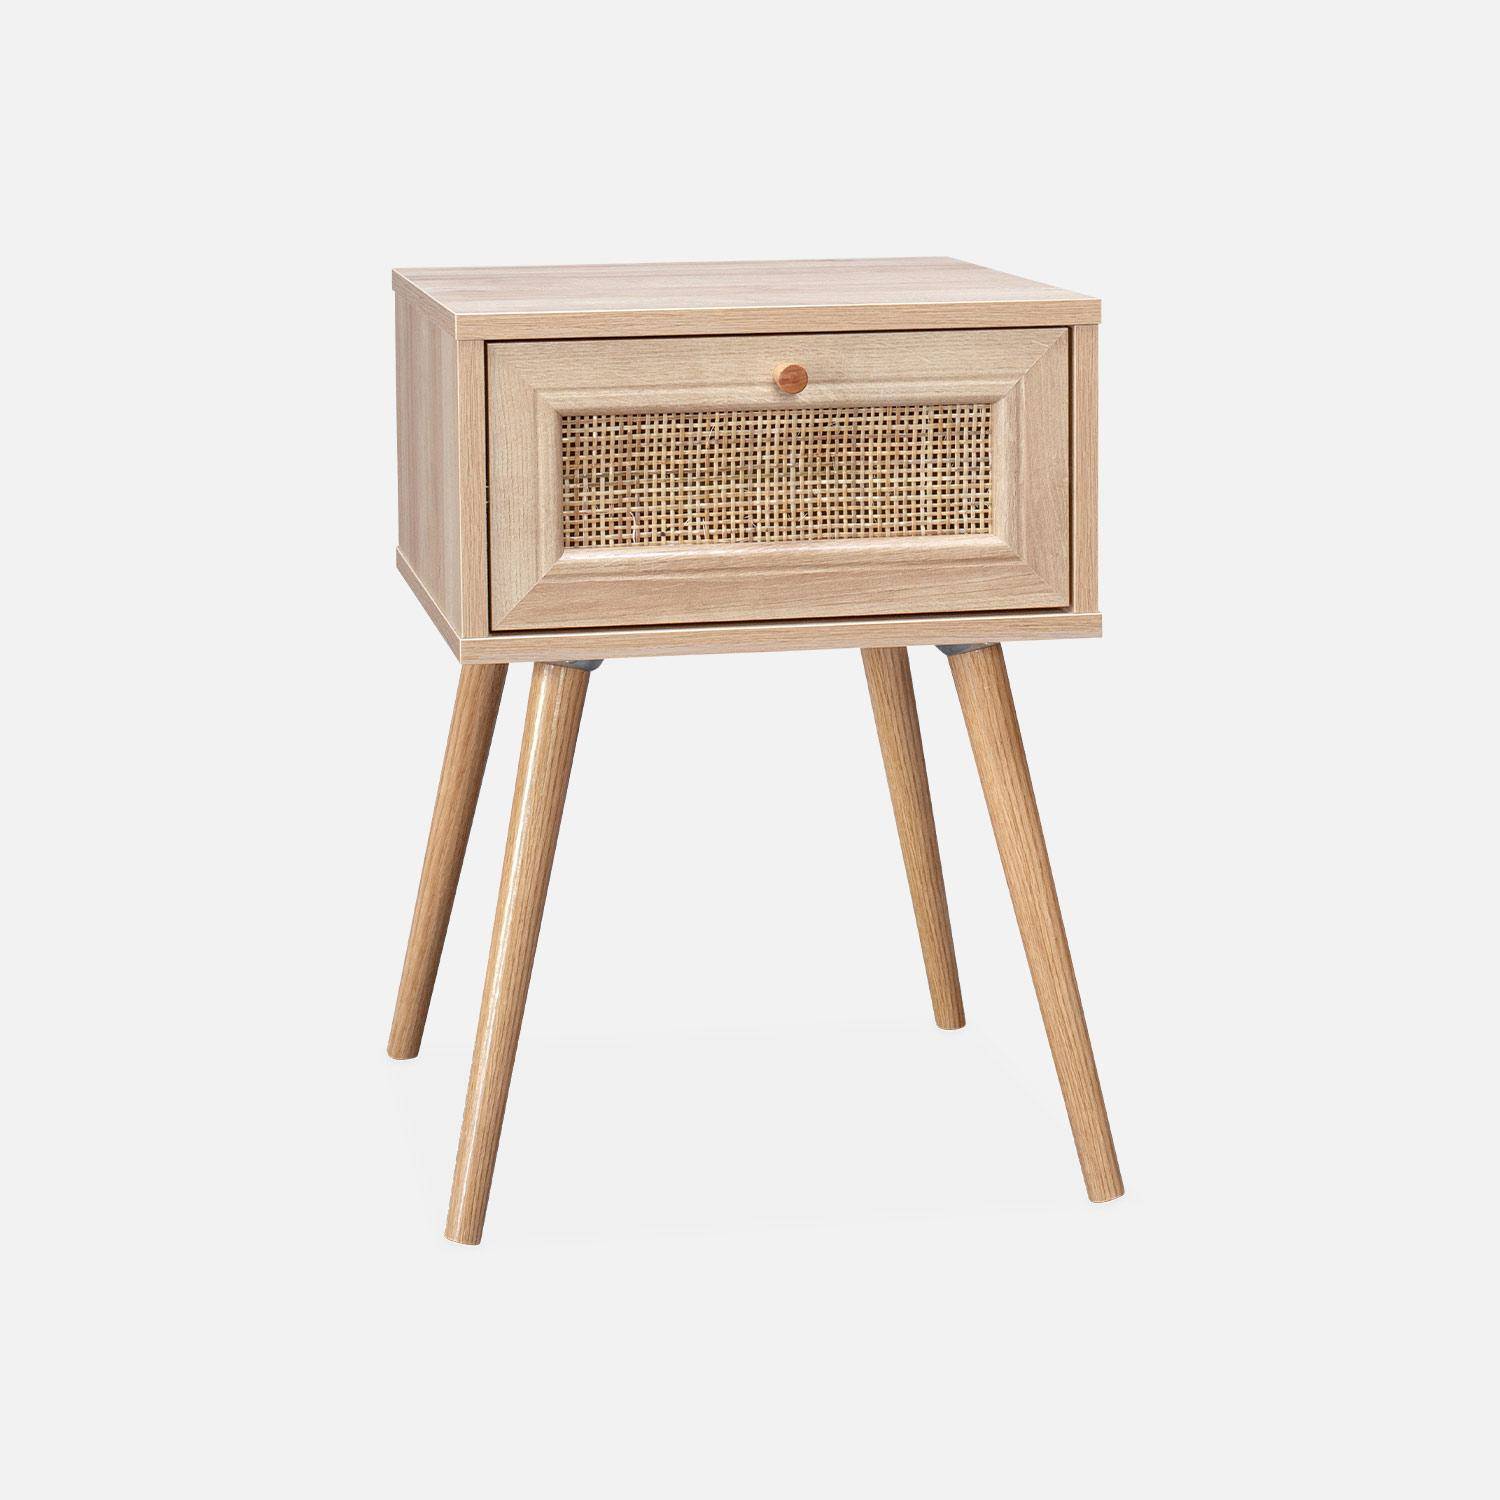 Pair of woven rattan bedside tables with drawer, 39x39x55.4cm - Boheme - Natural Wood colour Photo5